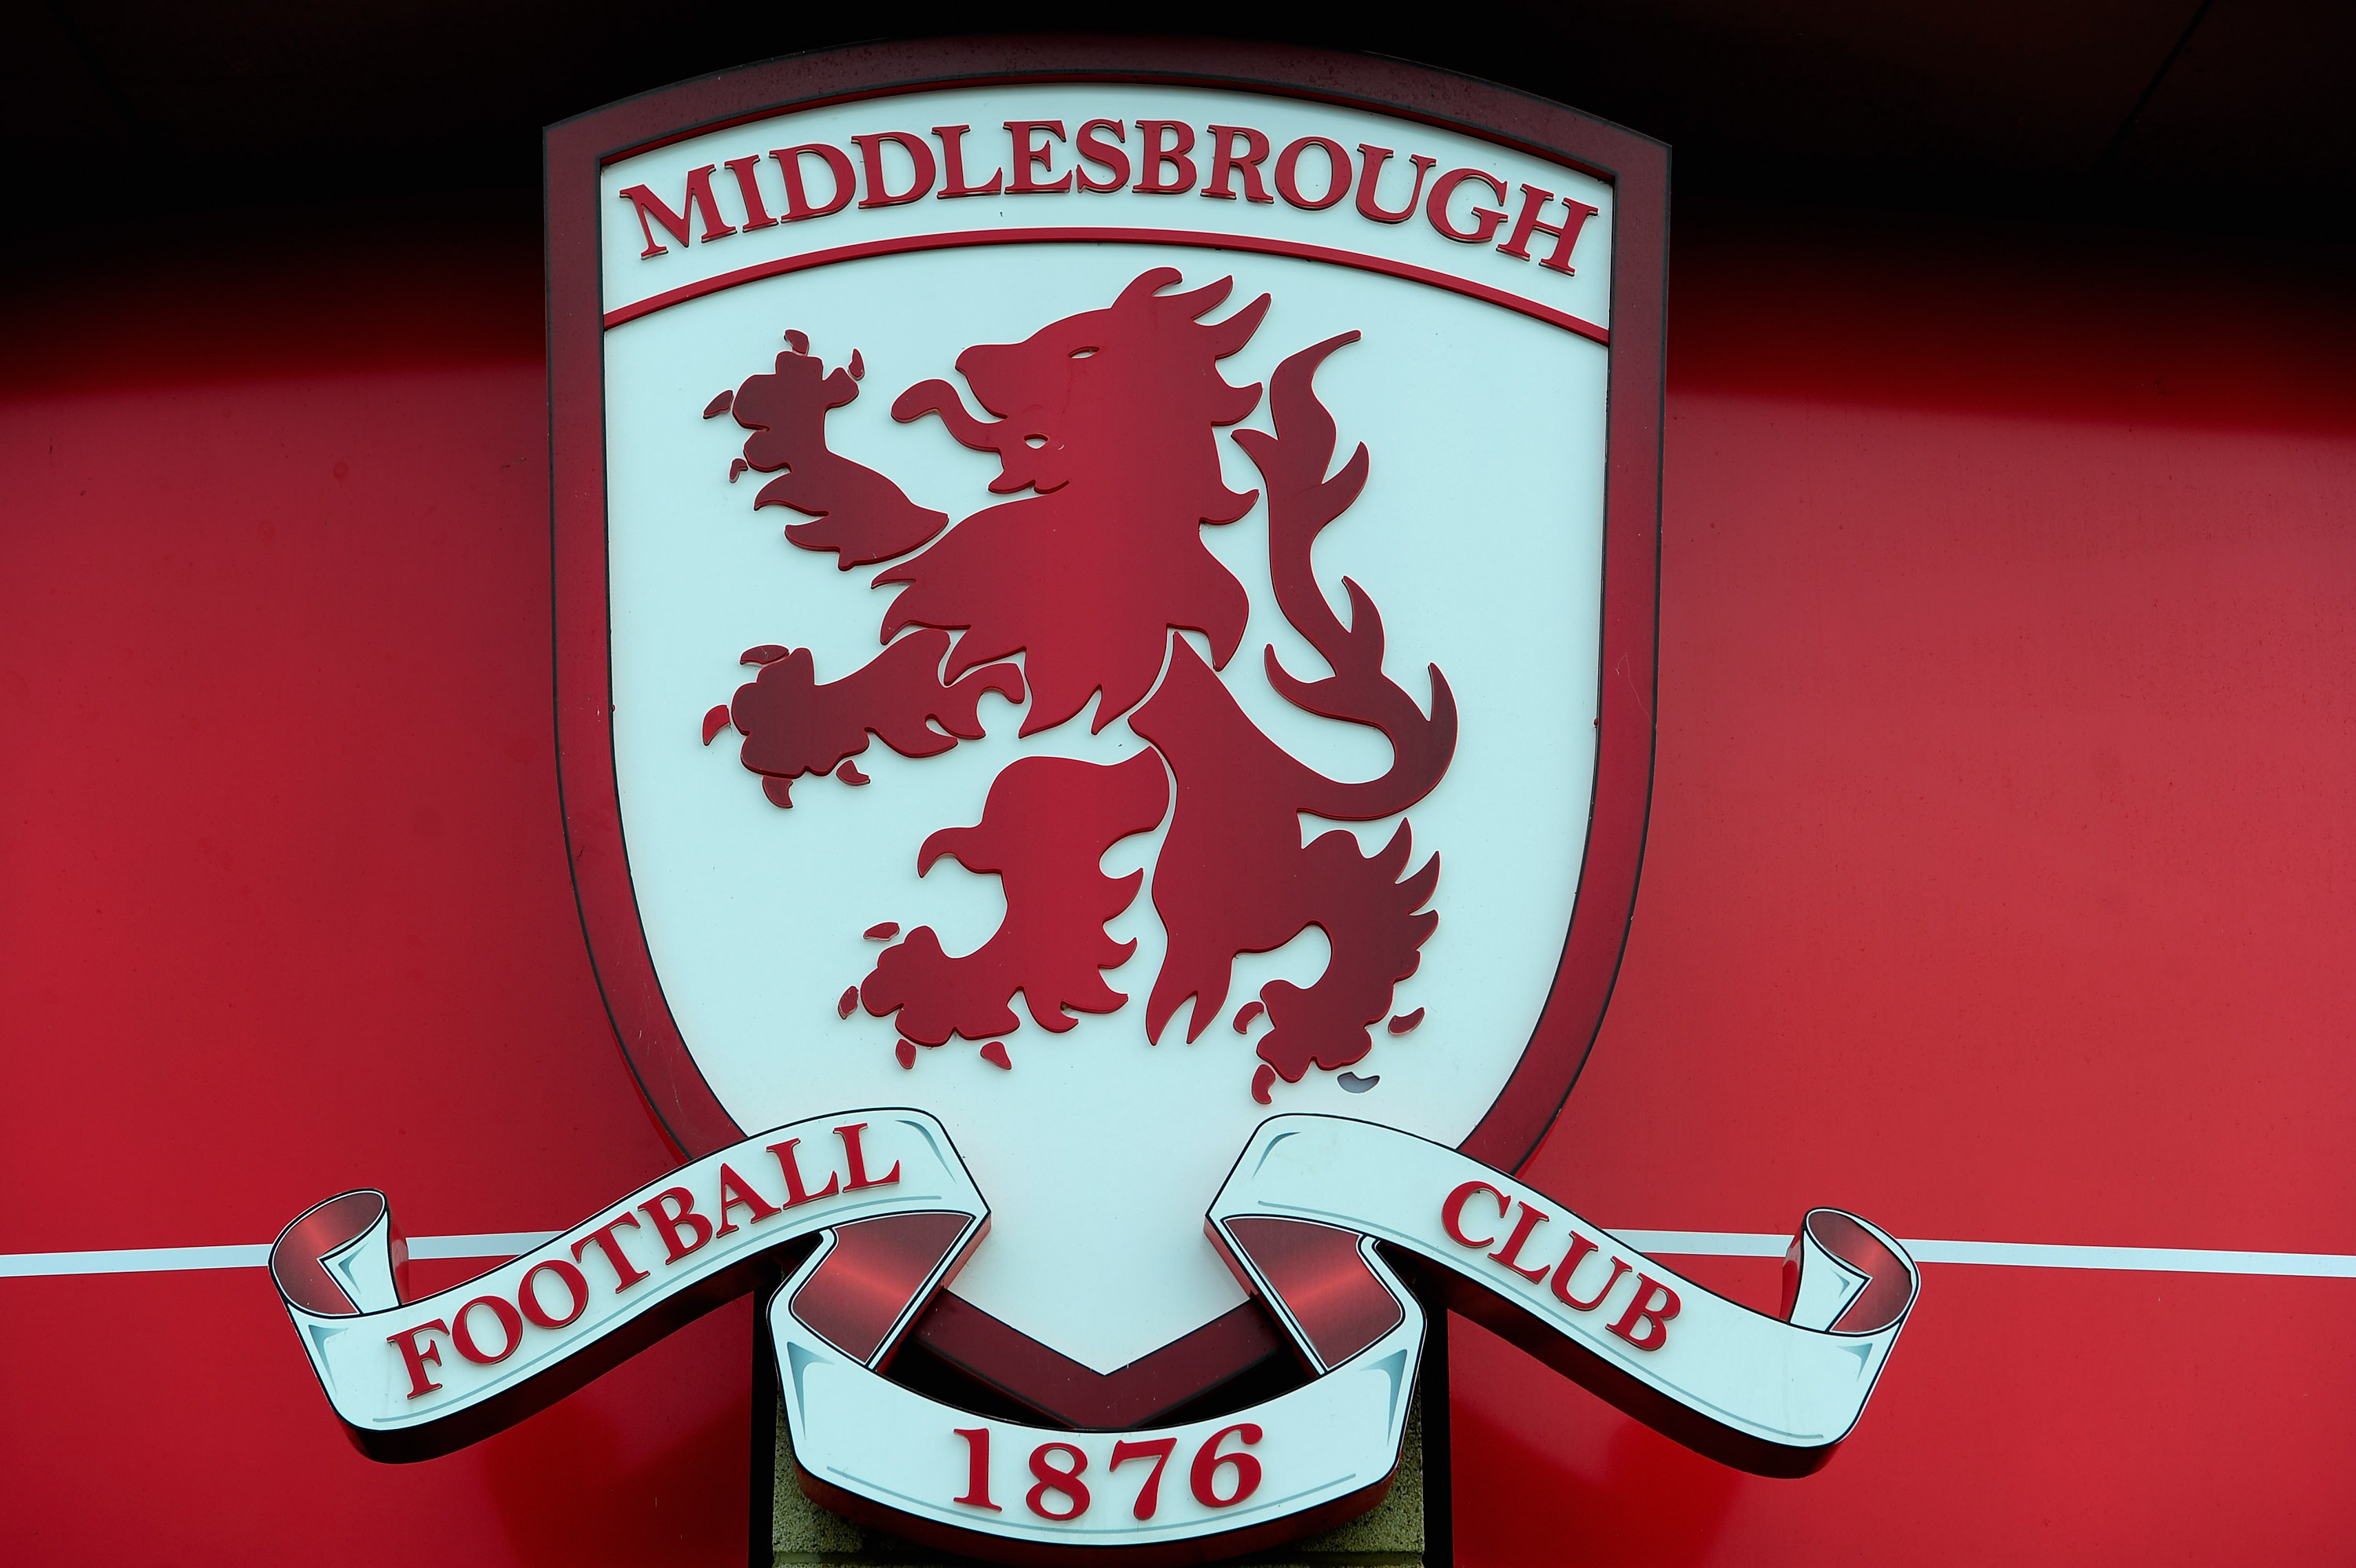 MIDDLESBROUGH, ENGLAND - MARCH 04:  A Middlesbrough sign is seen outside the Riverside Stadium, home of Middlesbrough Football Club on March 4, 2011 in Middlesbrough, England.  (Photo by Jamie McDonald/Getty Images)